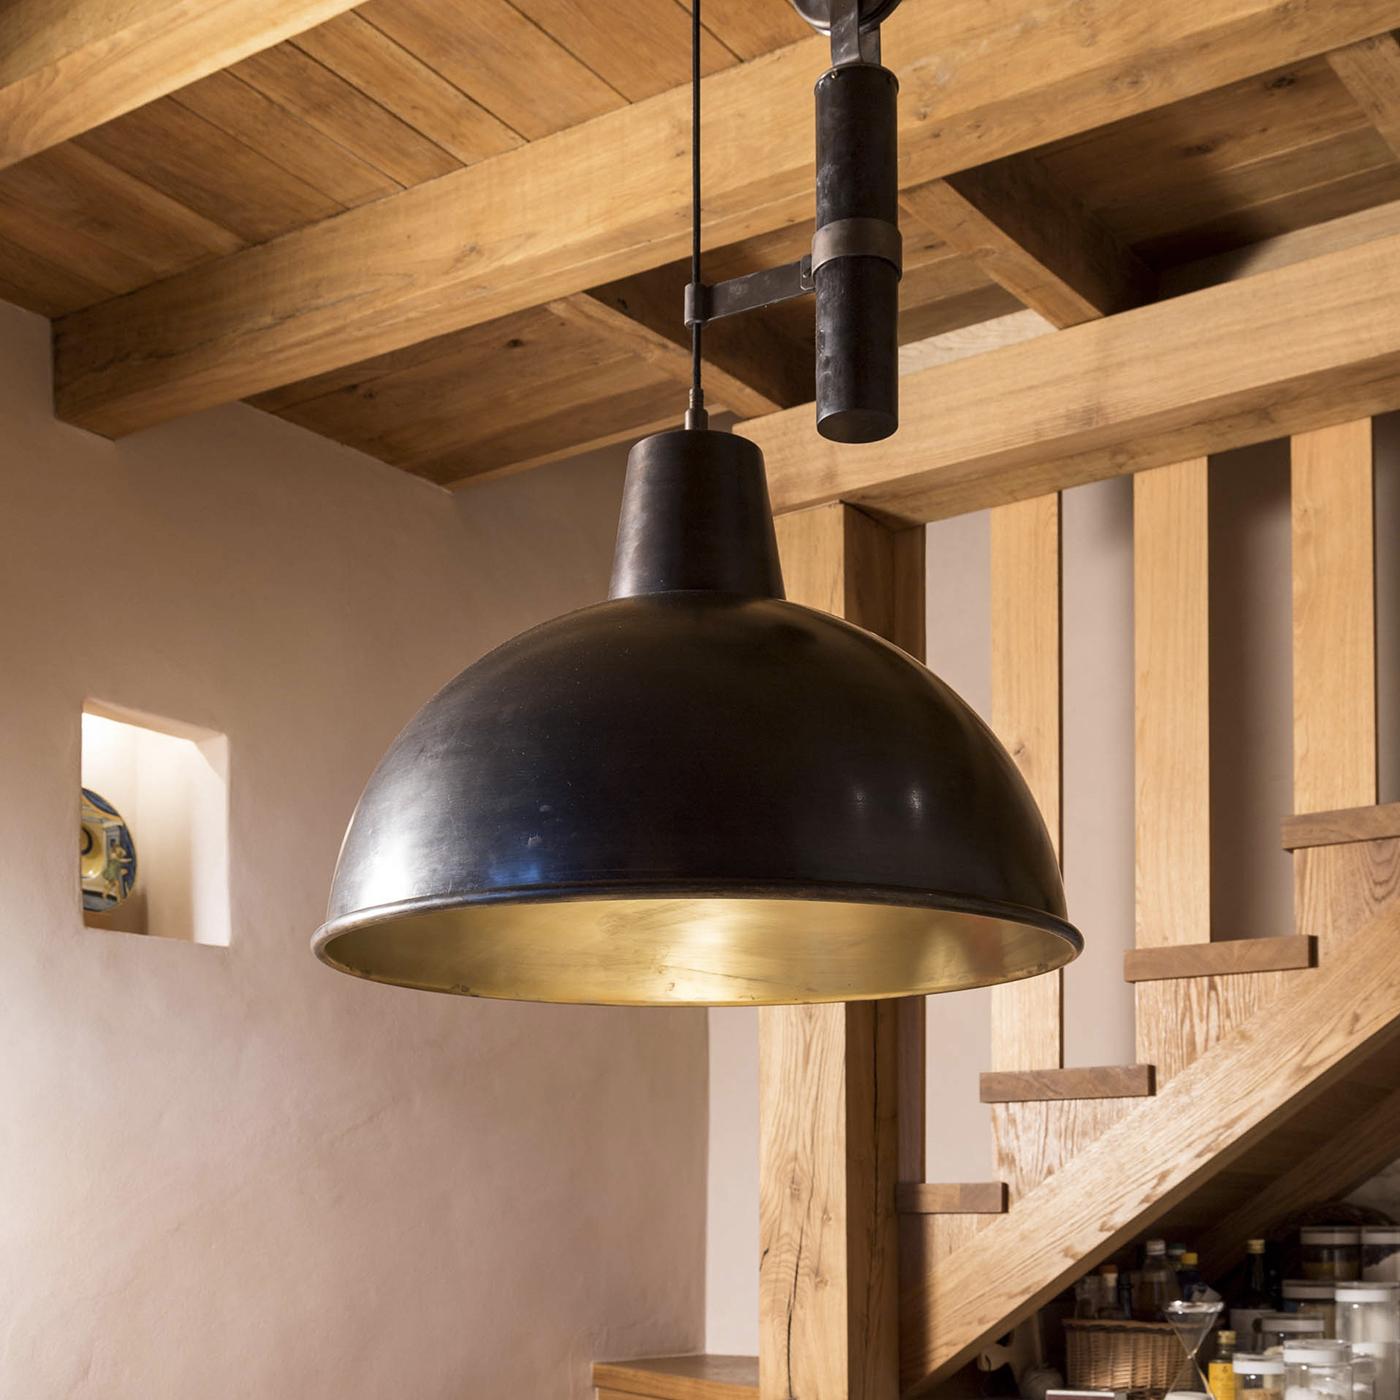 This striking suspension lamp is made in burnished brass on the outside and natural brass on the inside. It features a pulley and counterweight system fixed to the ceiling with a burnished brass plate. A beautiful addition to any home, this lamp